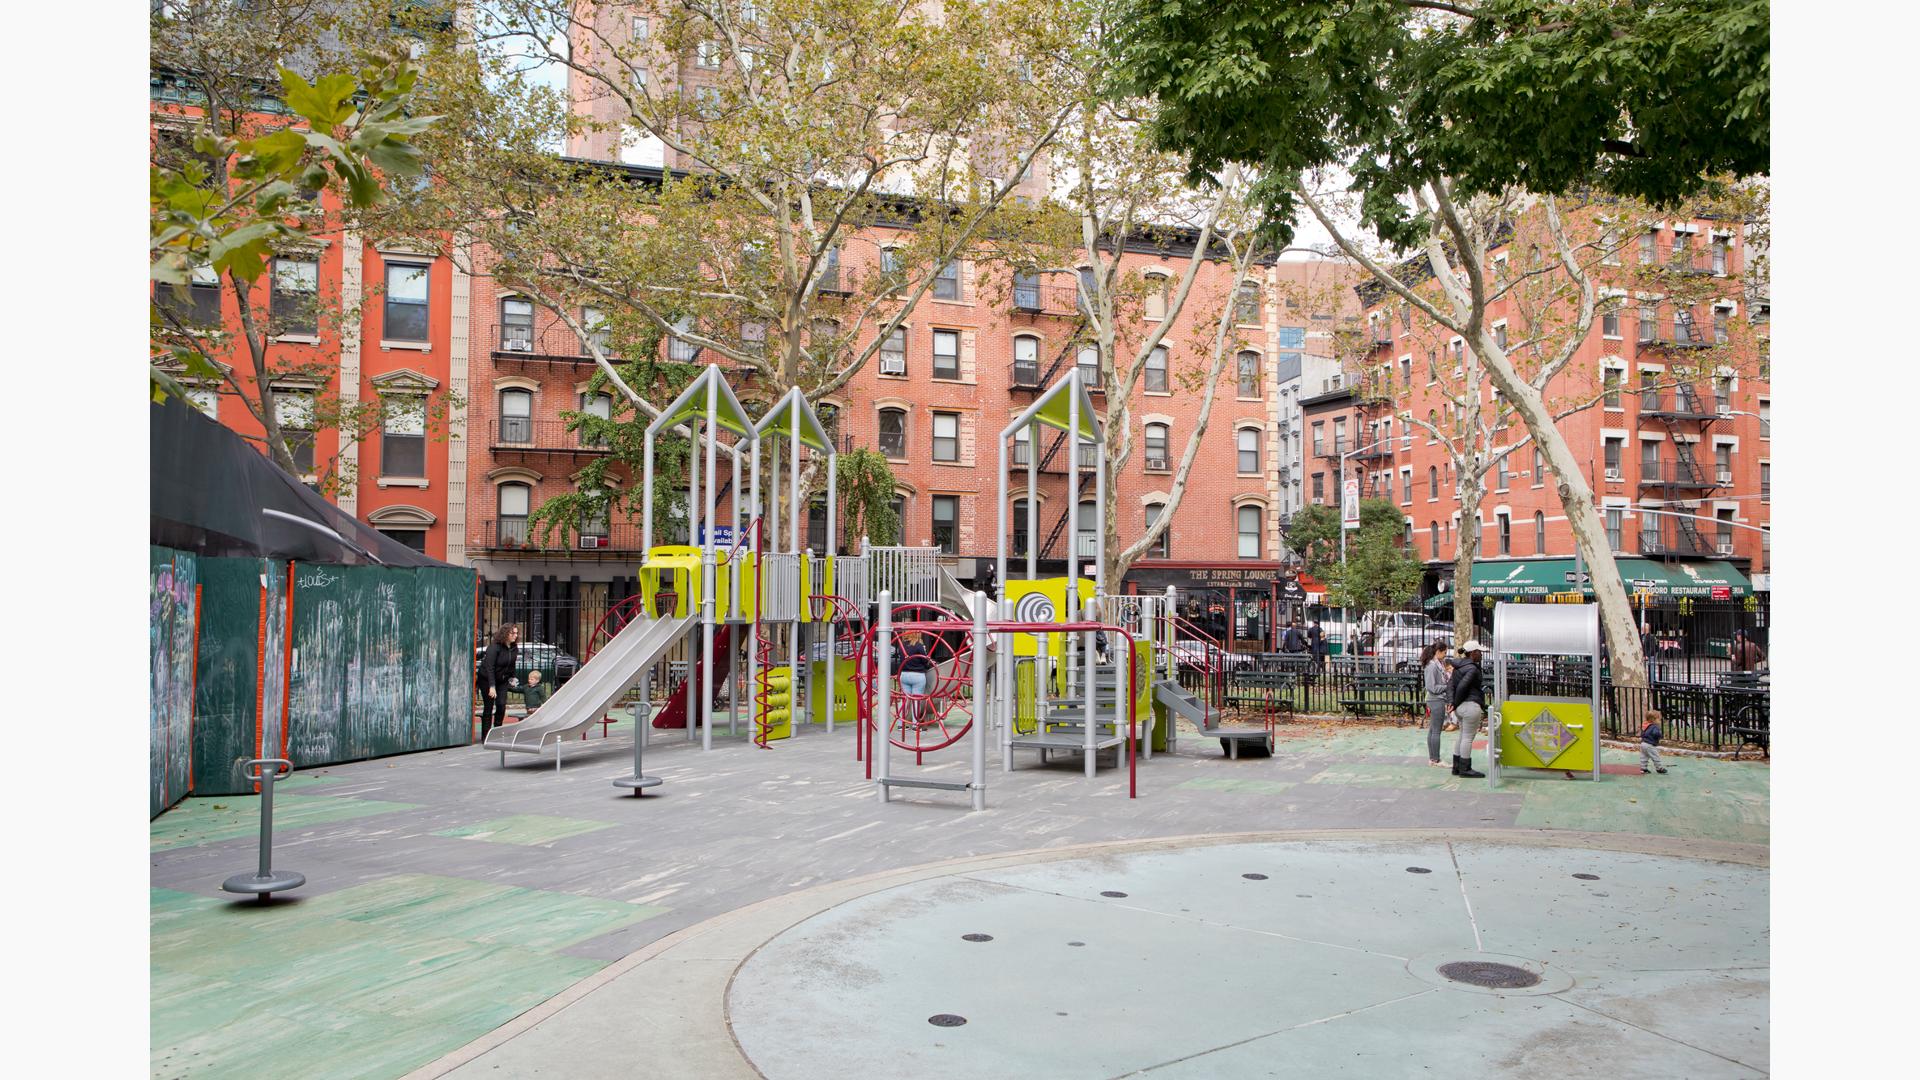 A silver and green color modern style play structure sits amongst older city brick buildings.